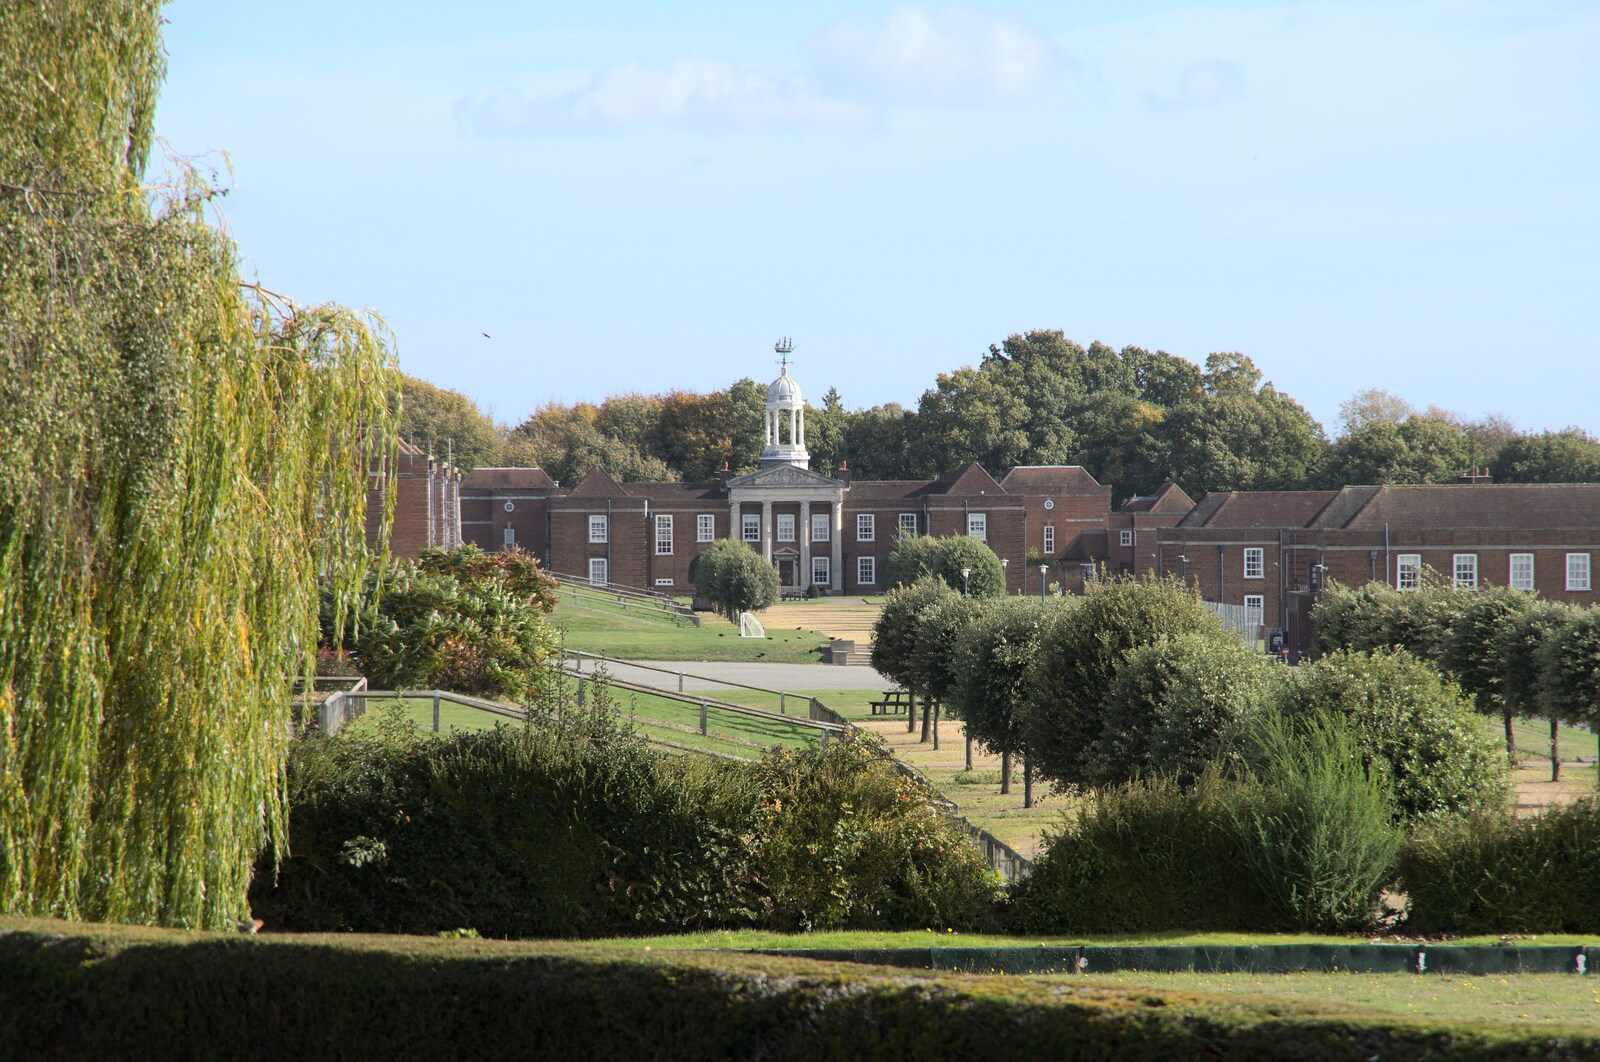 A Few Hours at Alton Water, Stutton, Suffolk - 22nd October 2022: The Royal Hospital School in Holbrook